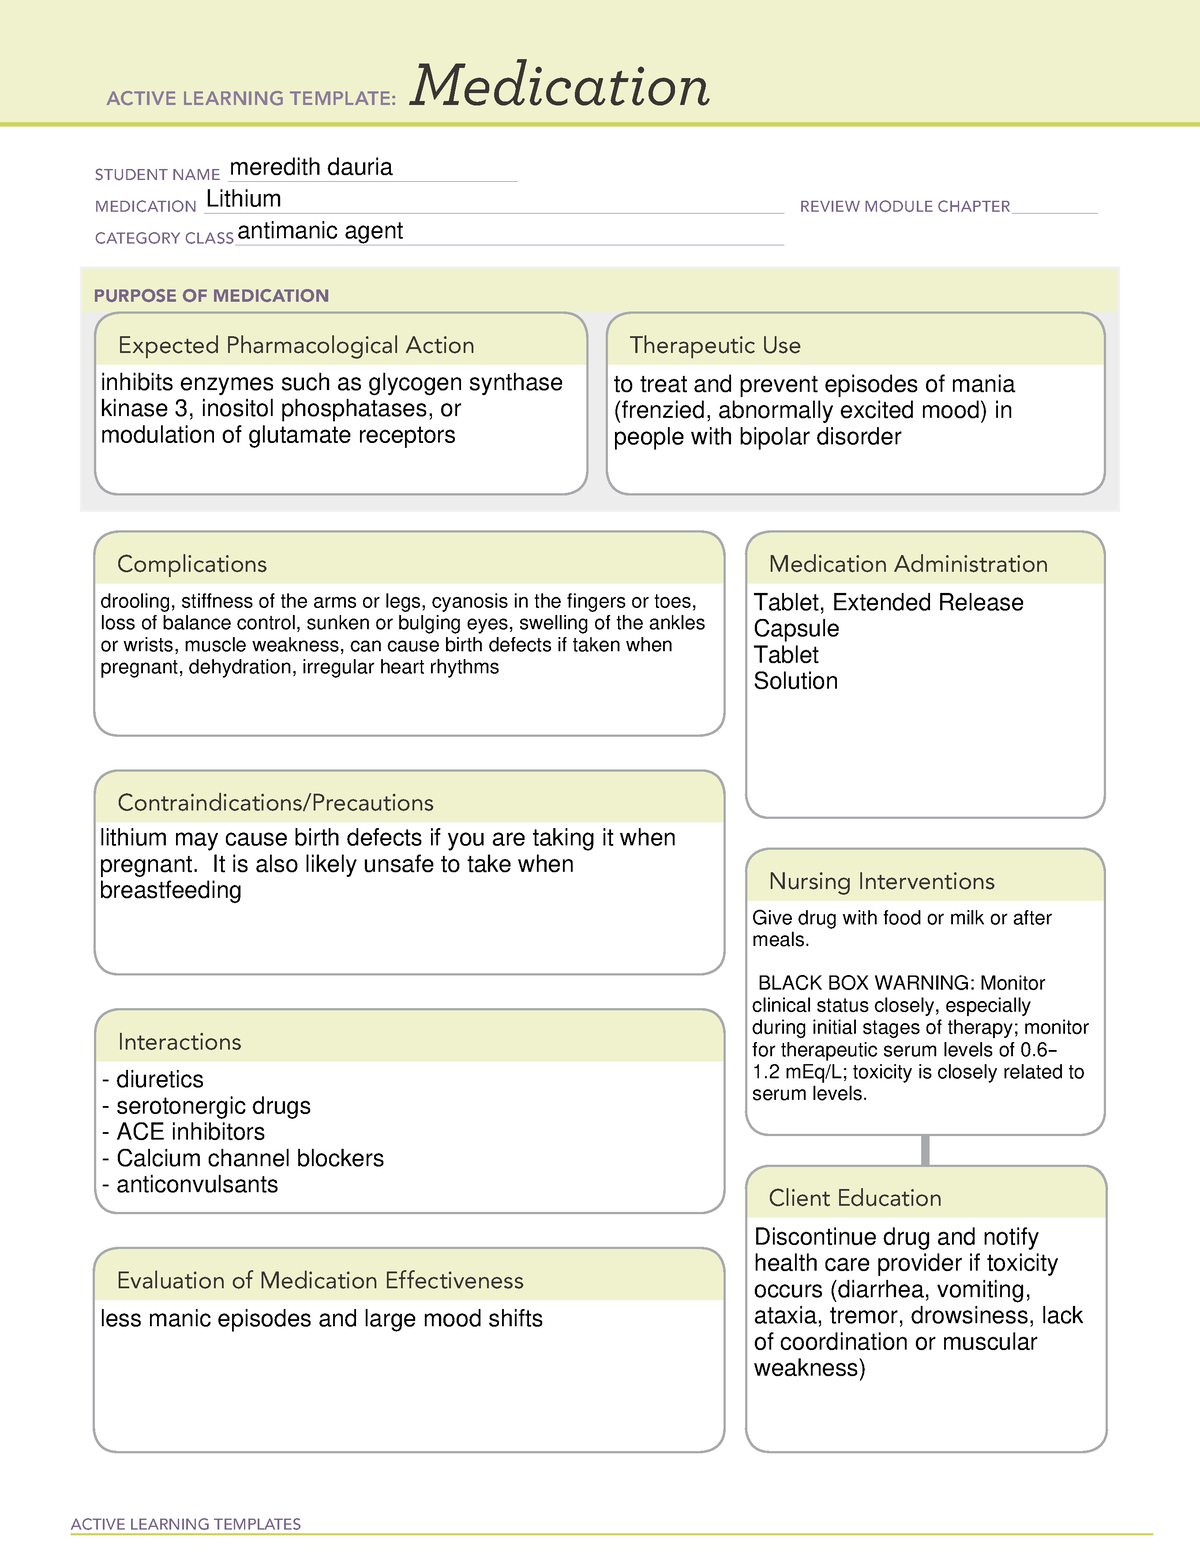 ATI active learning template Lithium ACTIVE LEARNING TEMPLATES